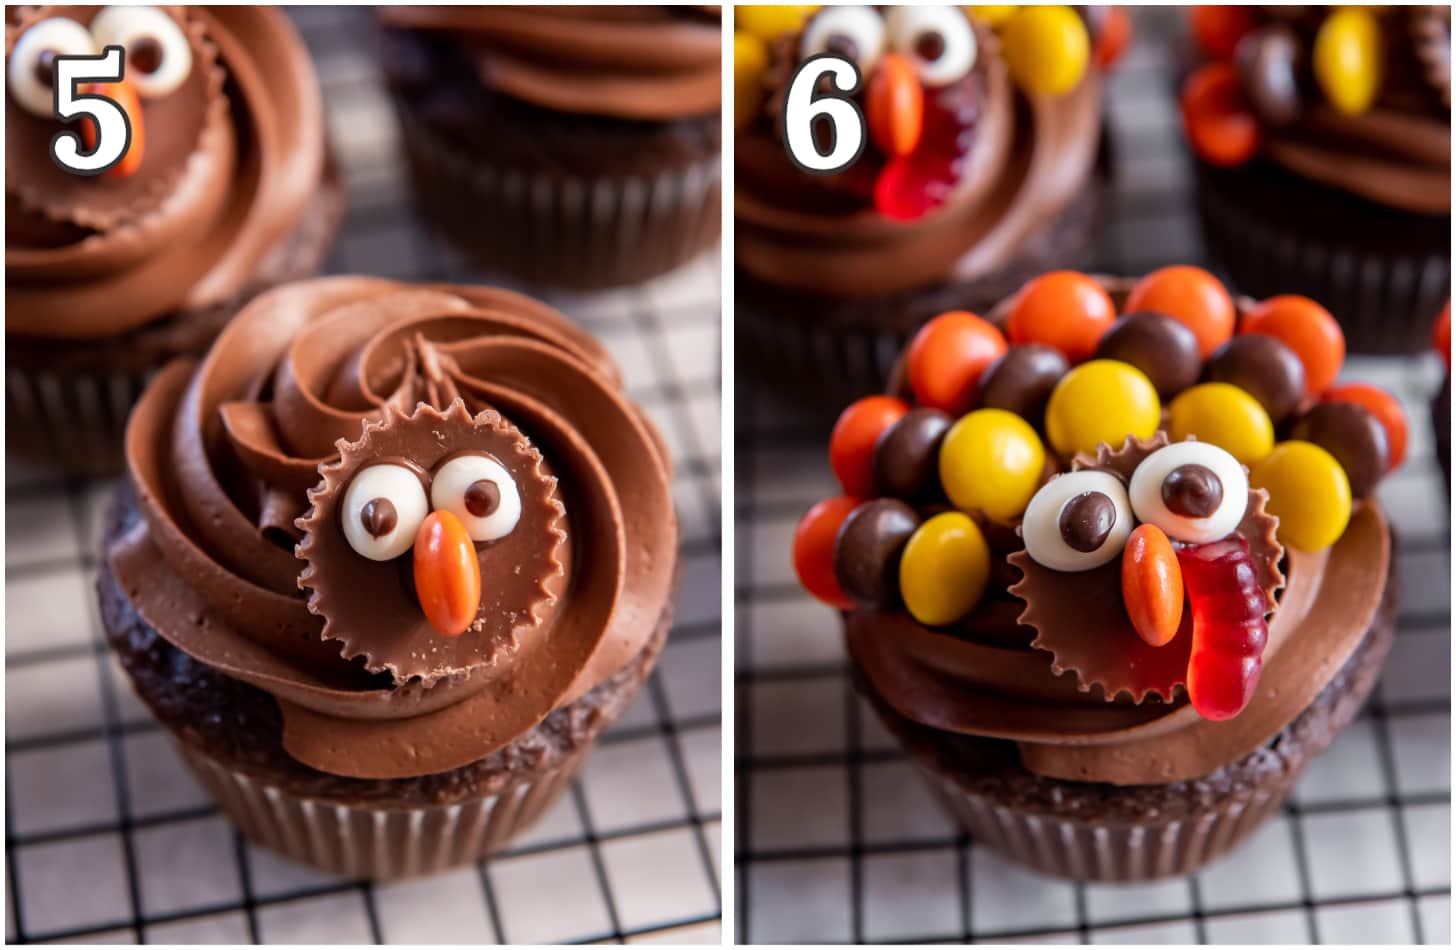 photo collage demonstrating how to decorate cupcakes to look like turkeys.